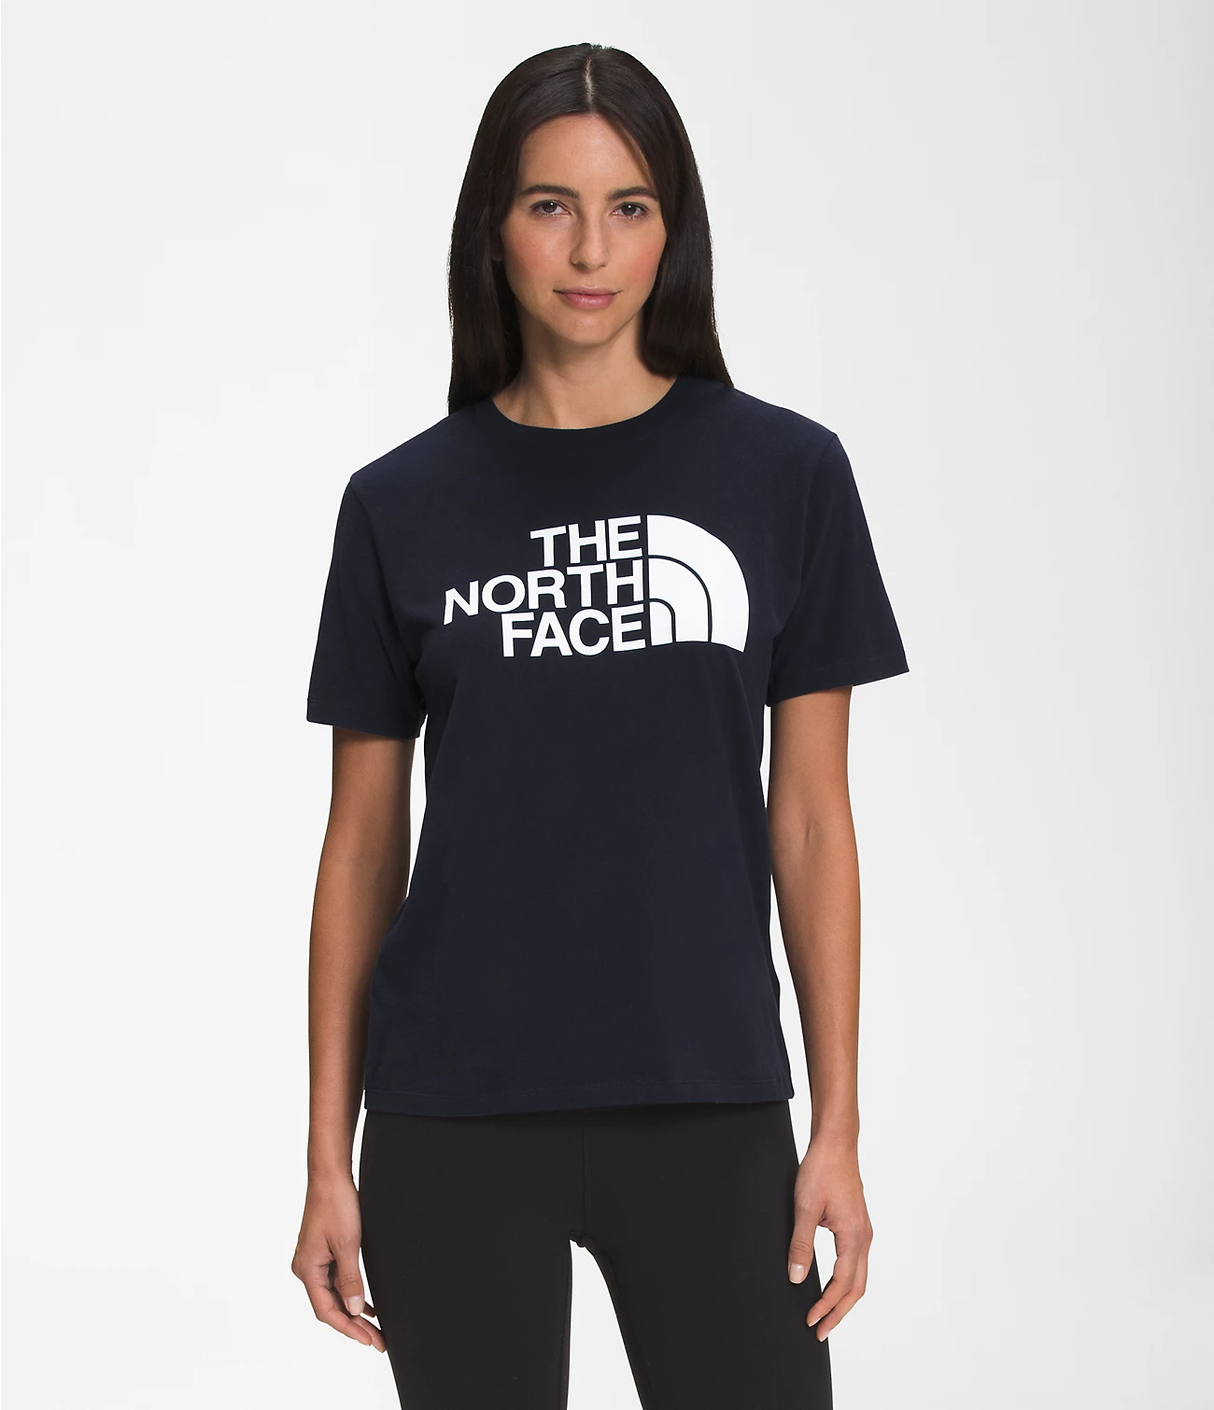 The North Face 2022 Women's Short Sleeve Half Dome Cotton Tee Shirt